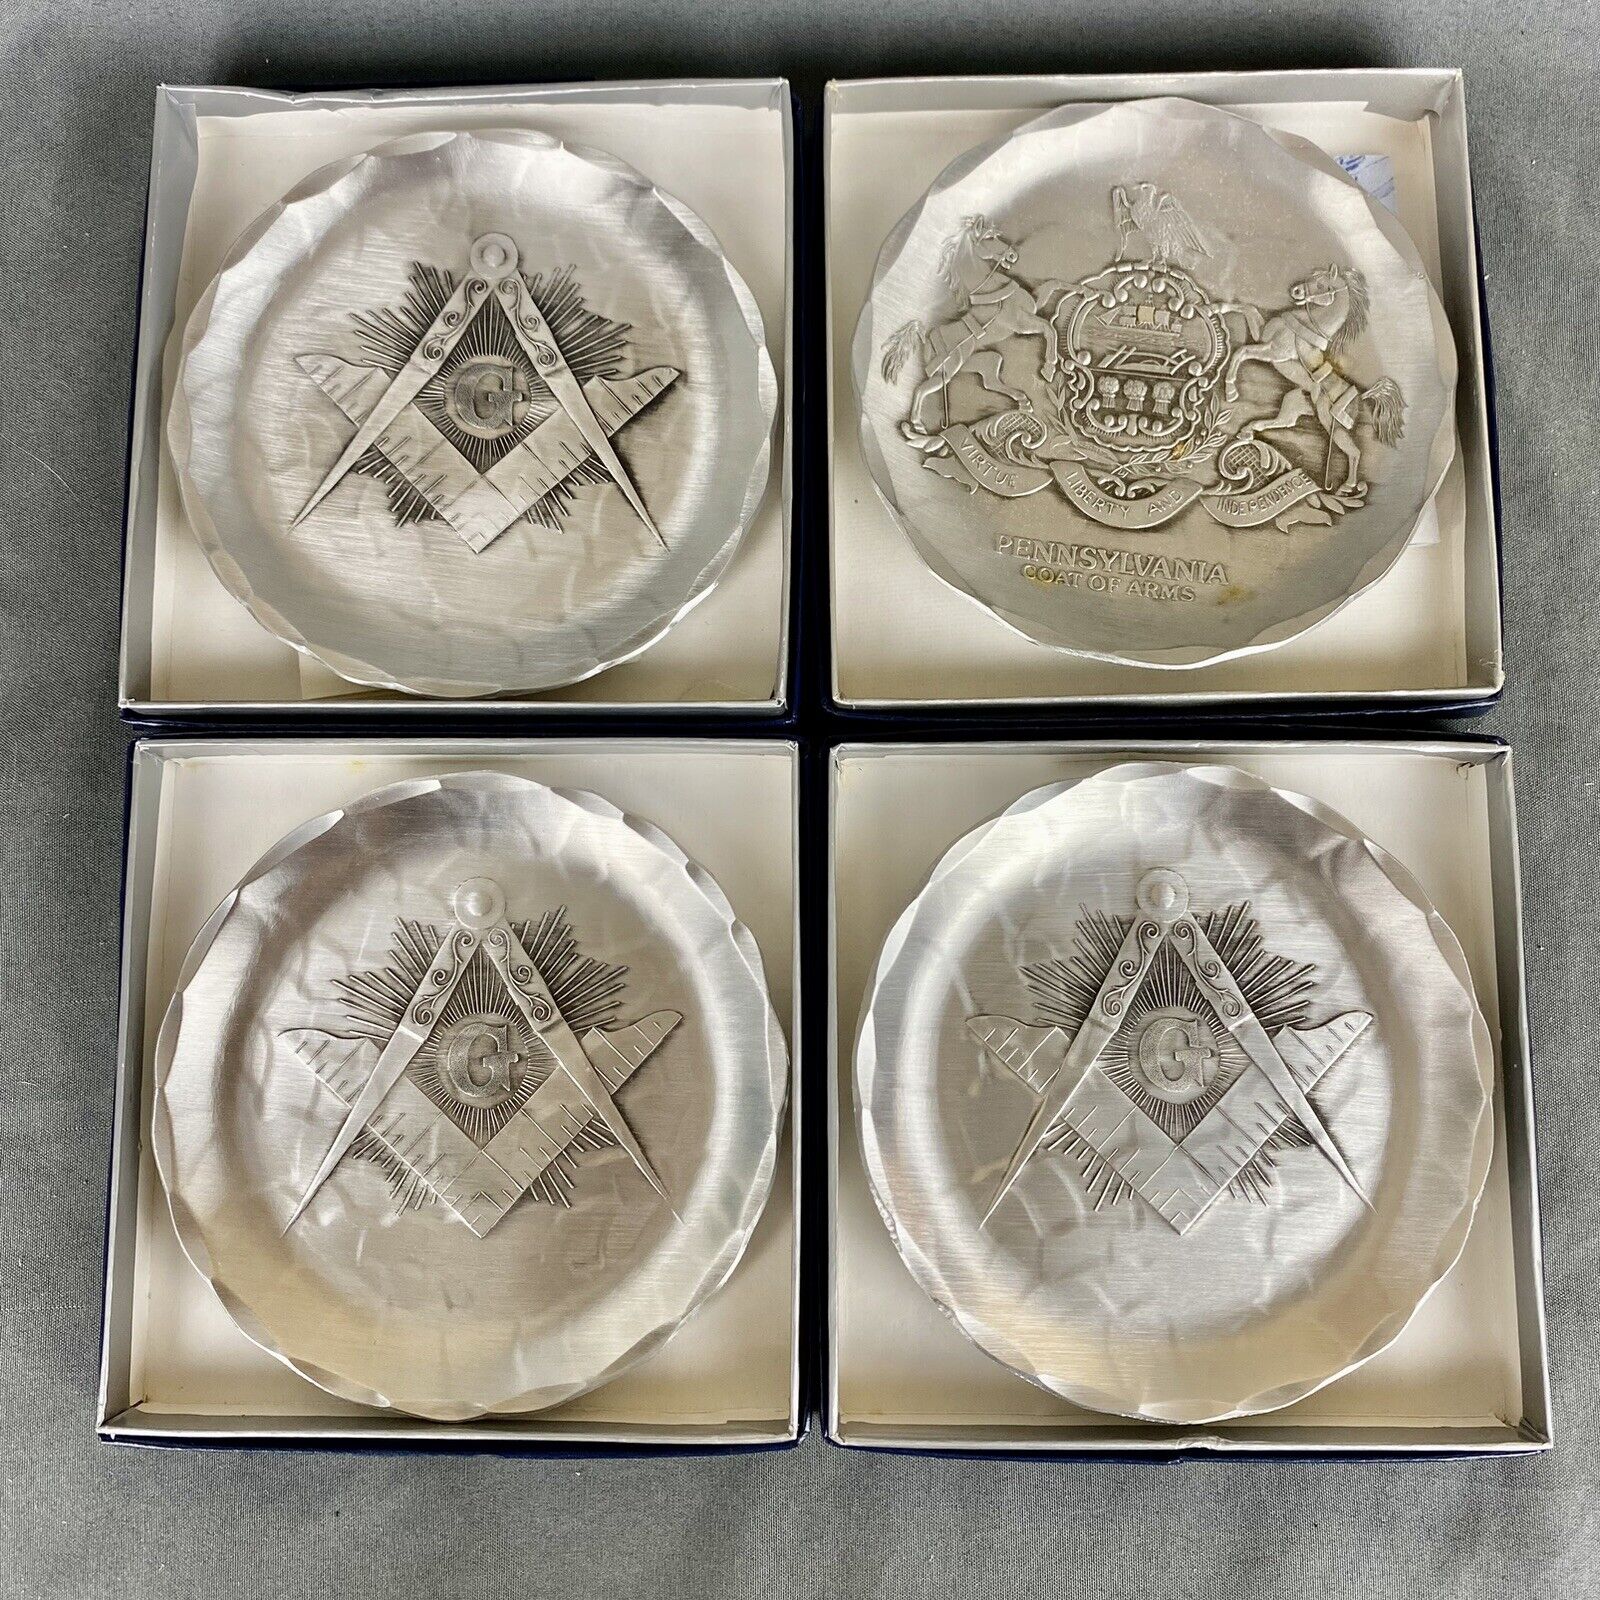 Wendell August Forge Lot of 4 Small Pewter Plates Masons